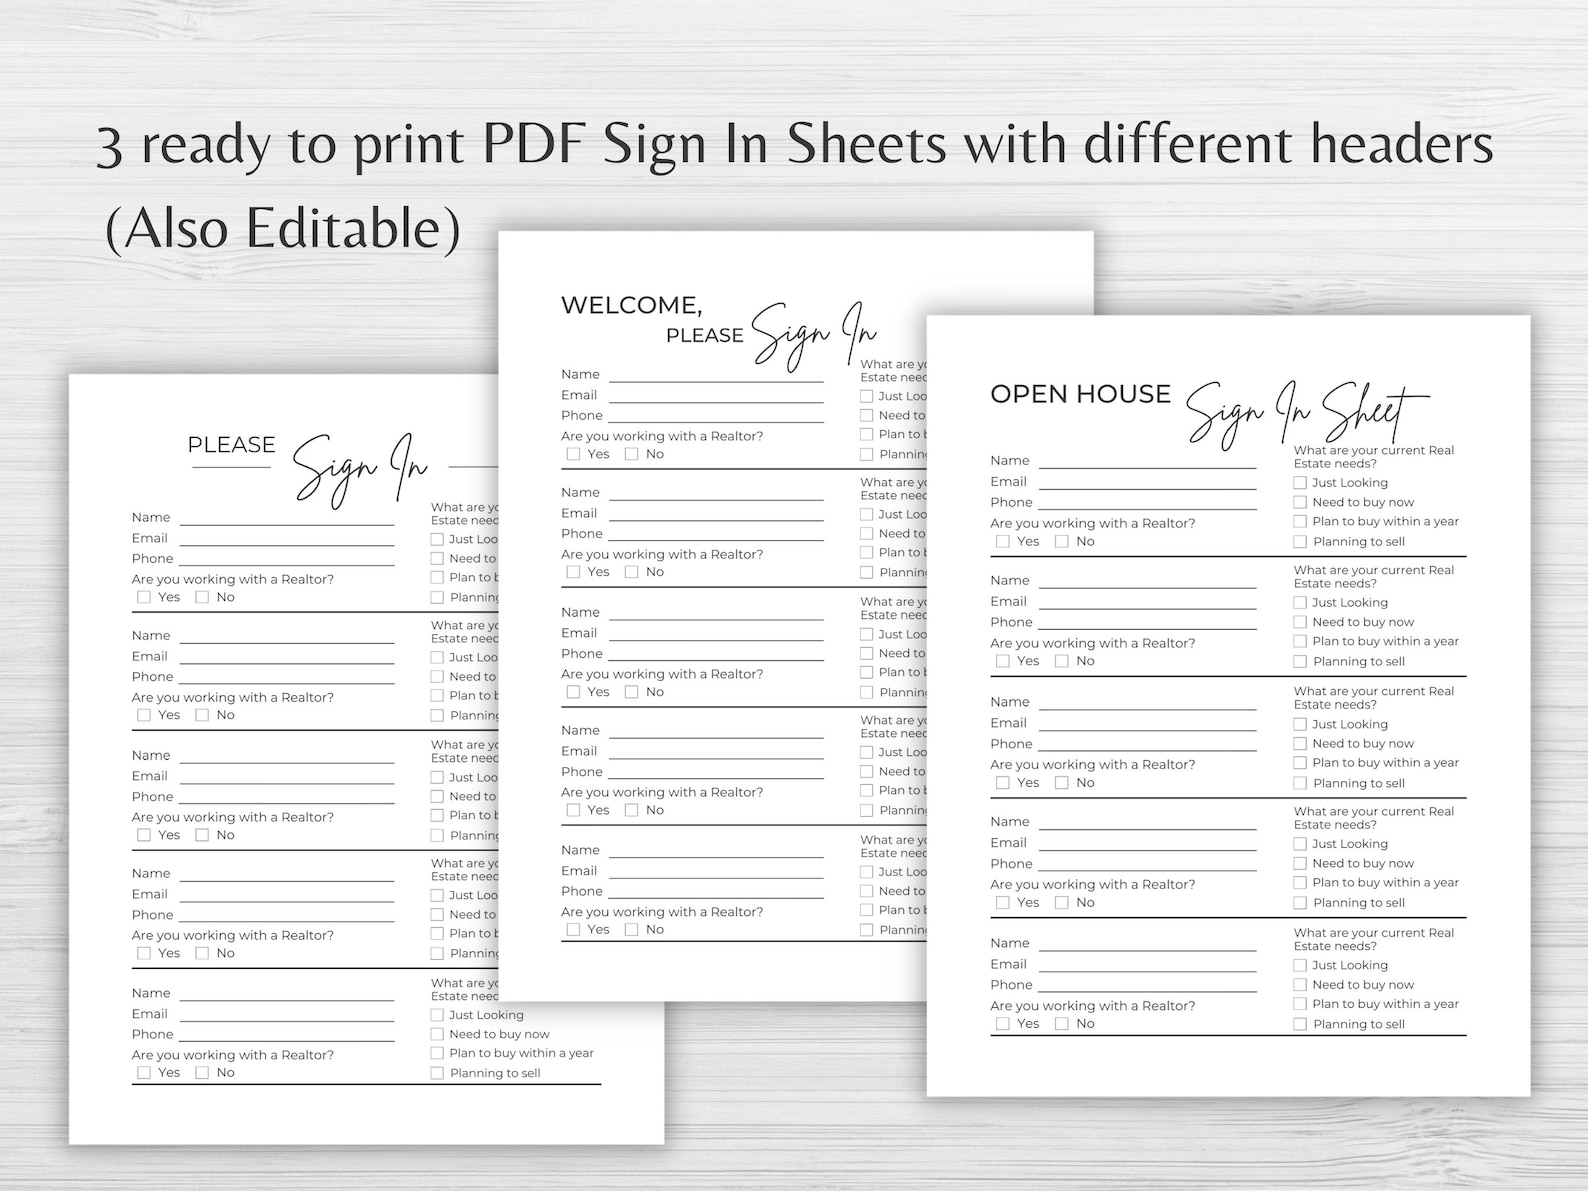 Open House Sign in Sheet Pdfs Feedback Forms Welcome Signs - Etsy